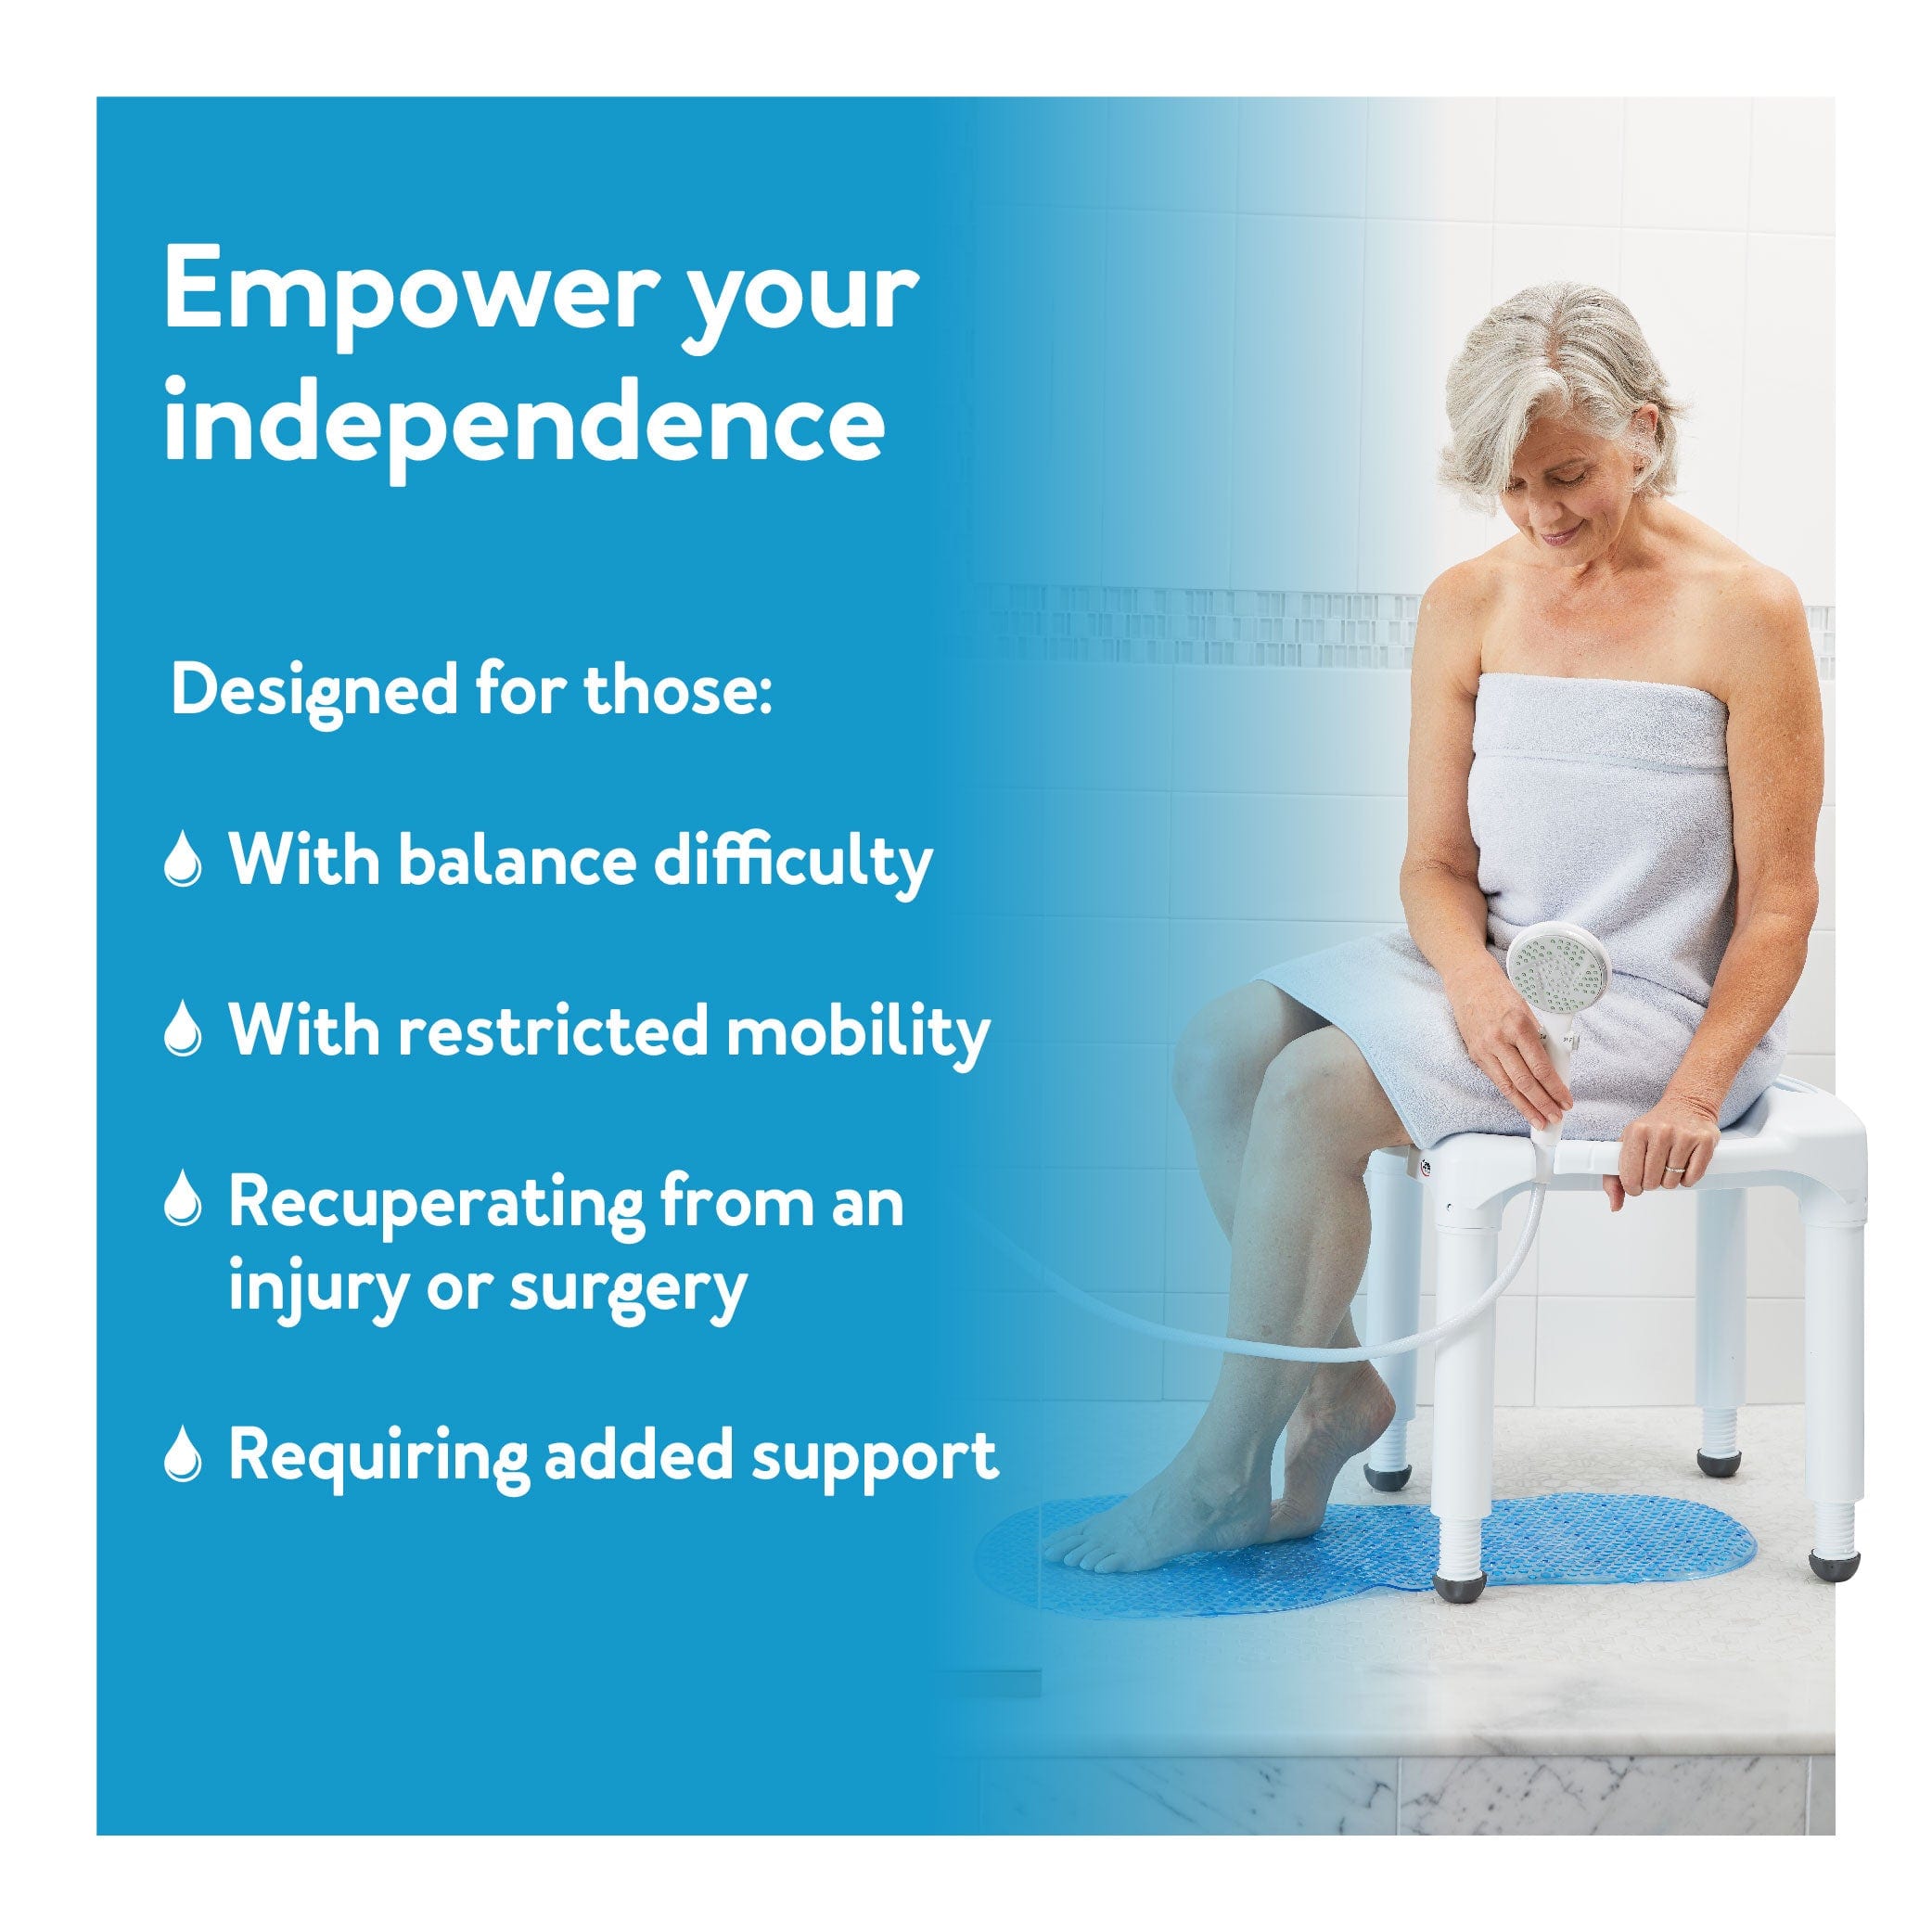 Carex Universal Bath Seat without Back - Carex Health Brands